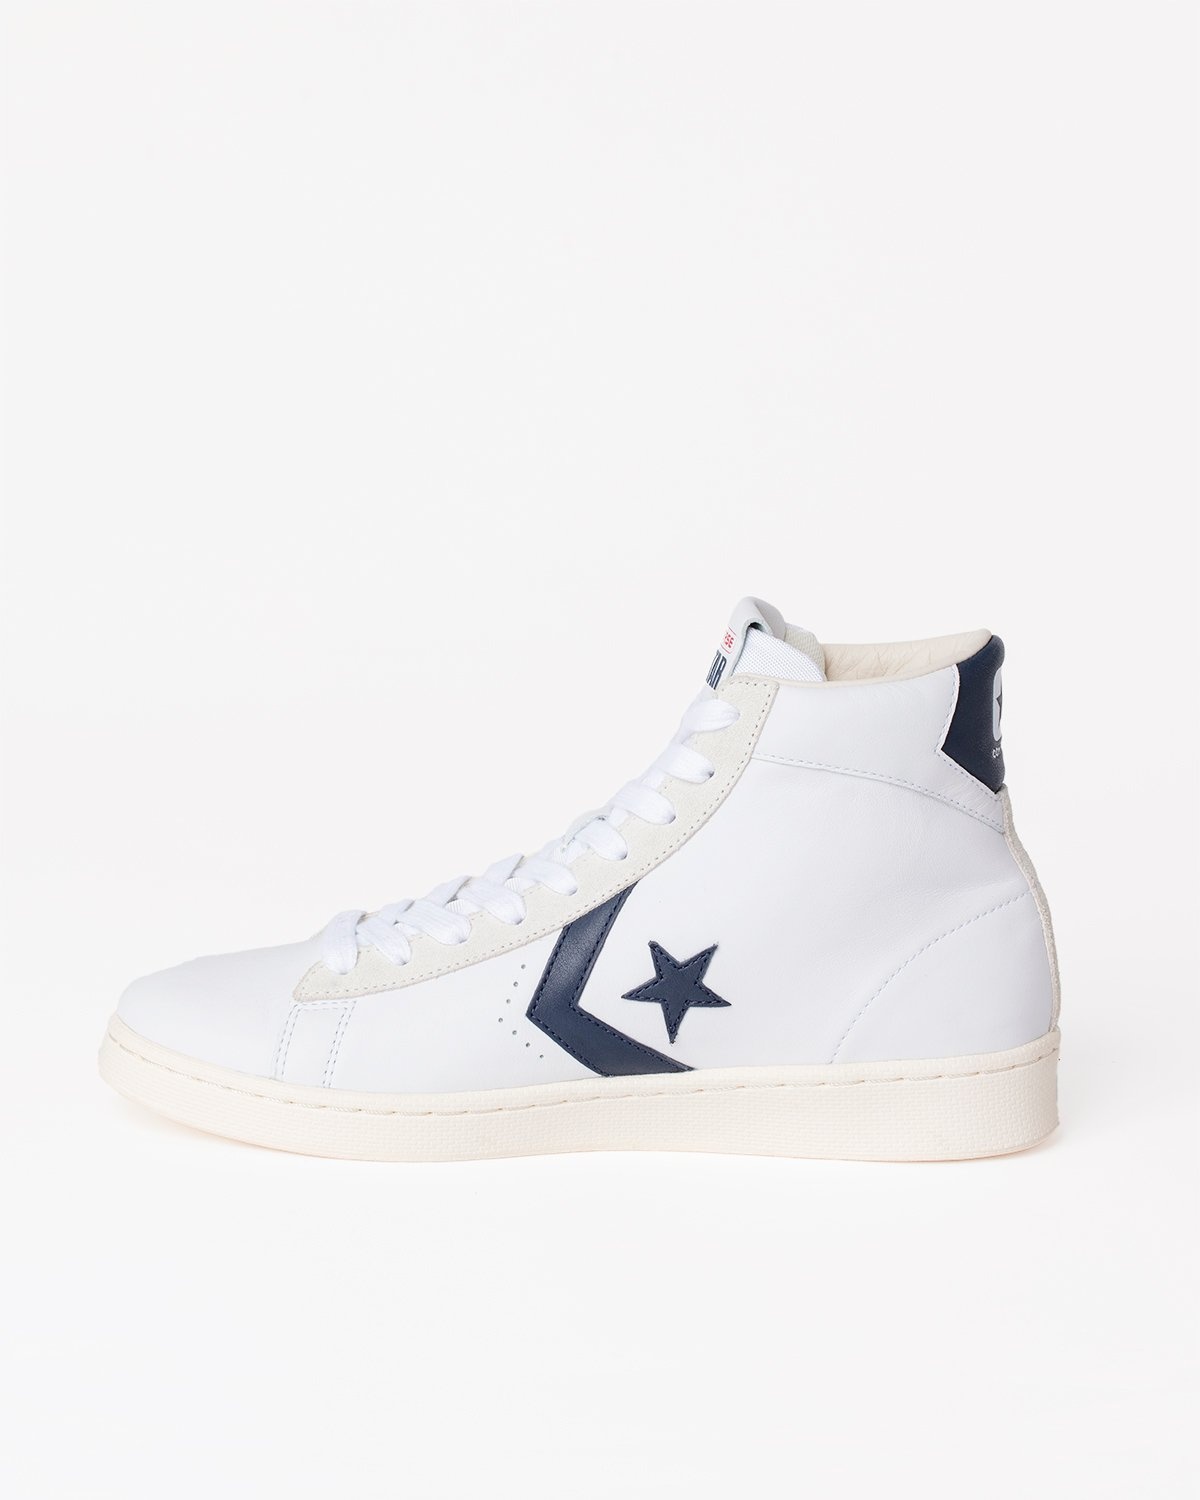 Converse – Pro Leather OG Mid White/Obsidian/Egret - High Top Sneakers - White - Image 6